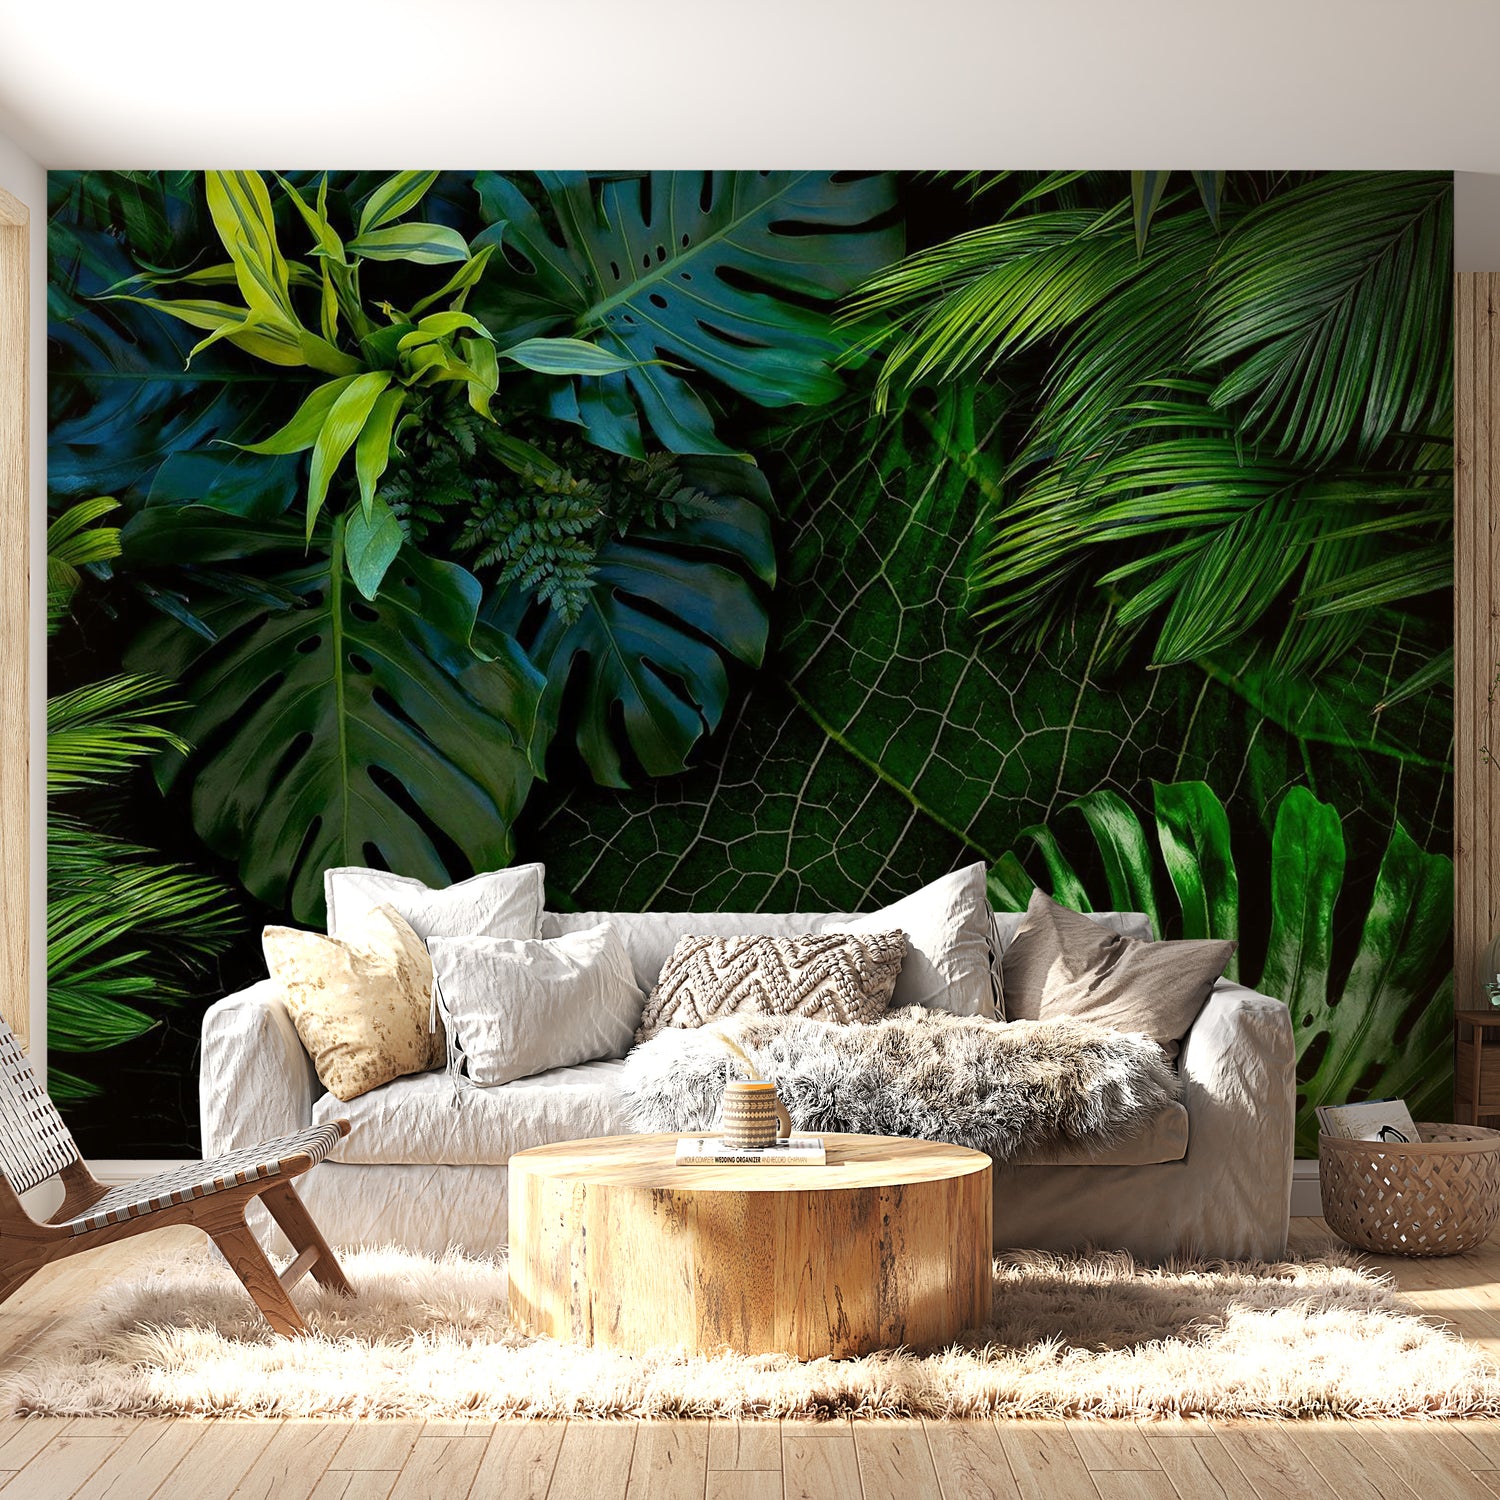 Peel & Stick Botanical Wall Mural - Dark Jungle - Removable Wall Decals